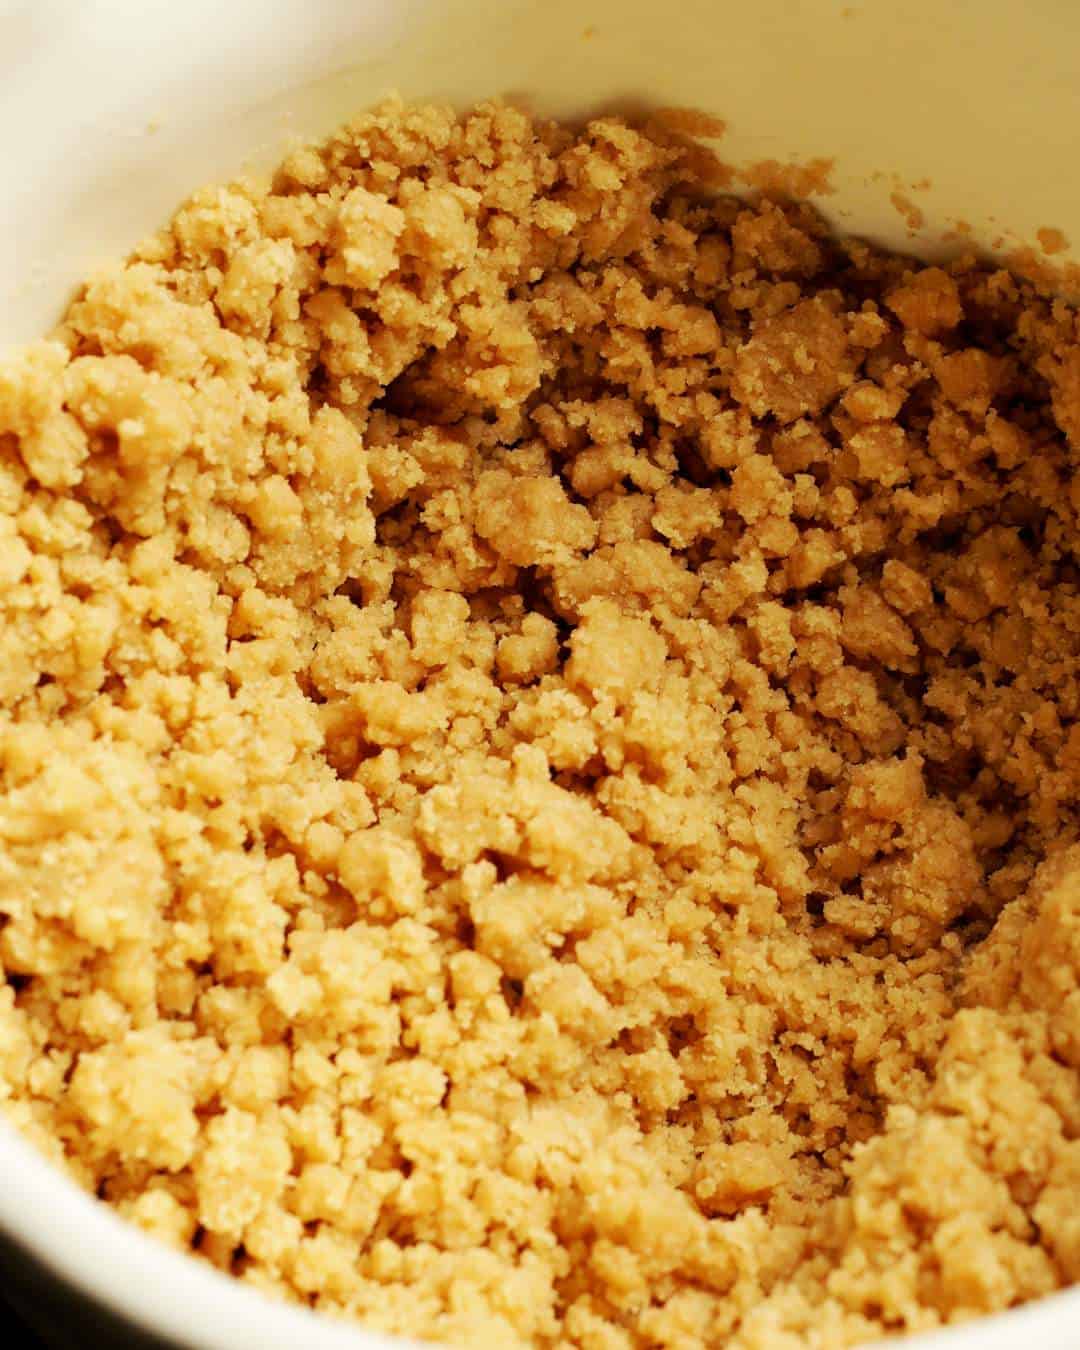 Crumbly vegan cinnamon cookie dough in a mixing bowl.